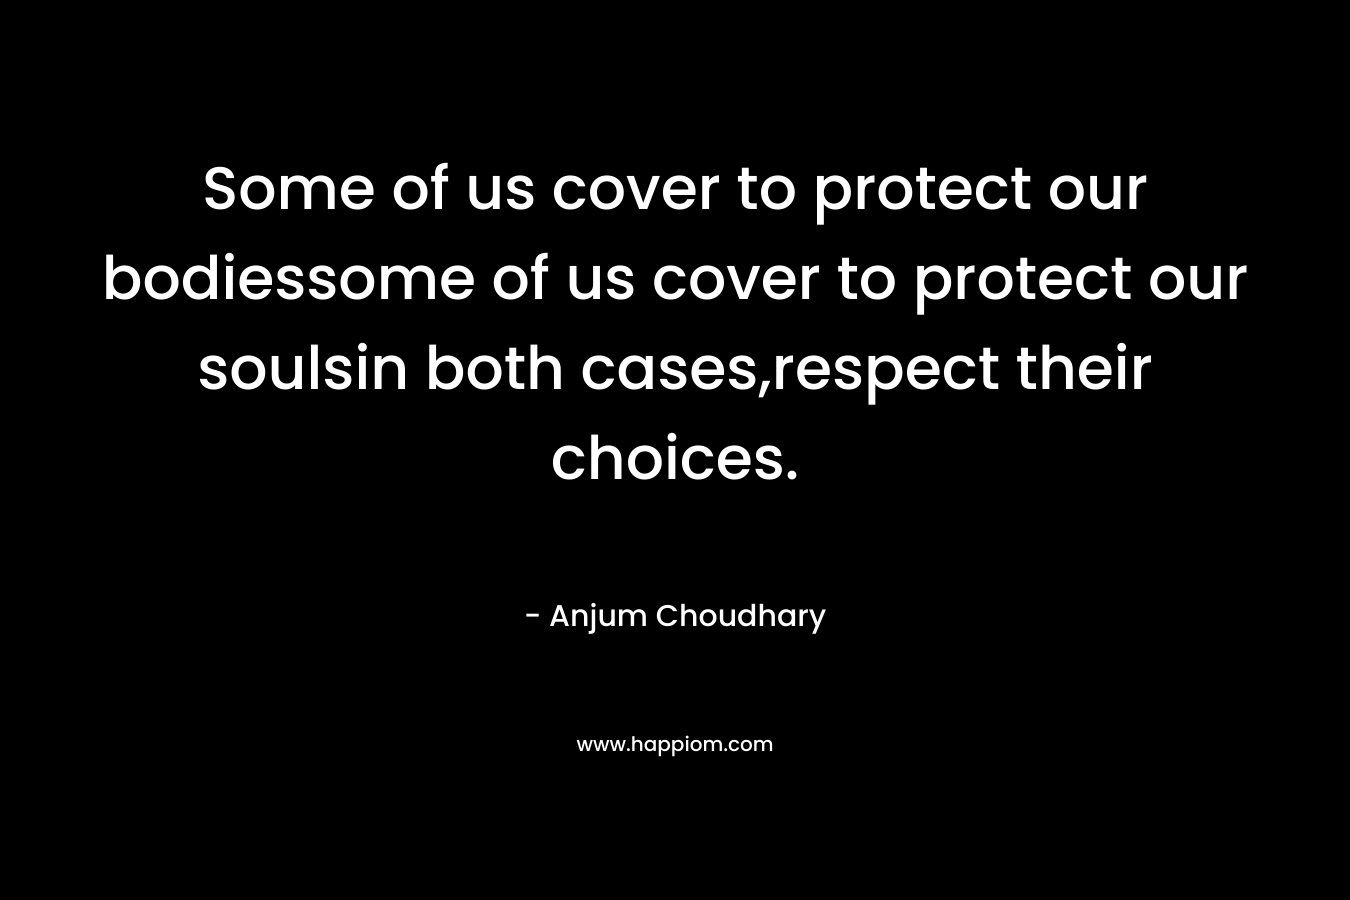 Some of us cover to protect our bodiessome of us cover to protect our soulsin both cases,respect their choices.